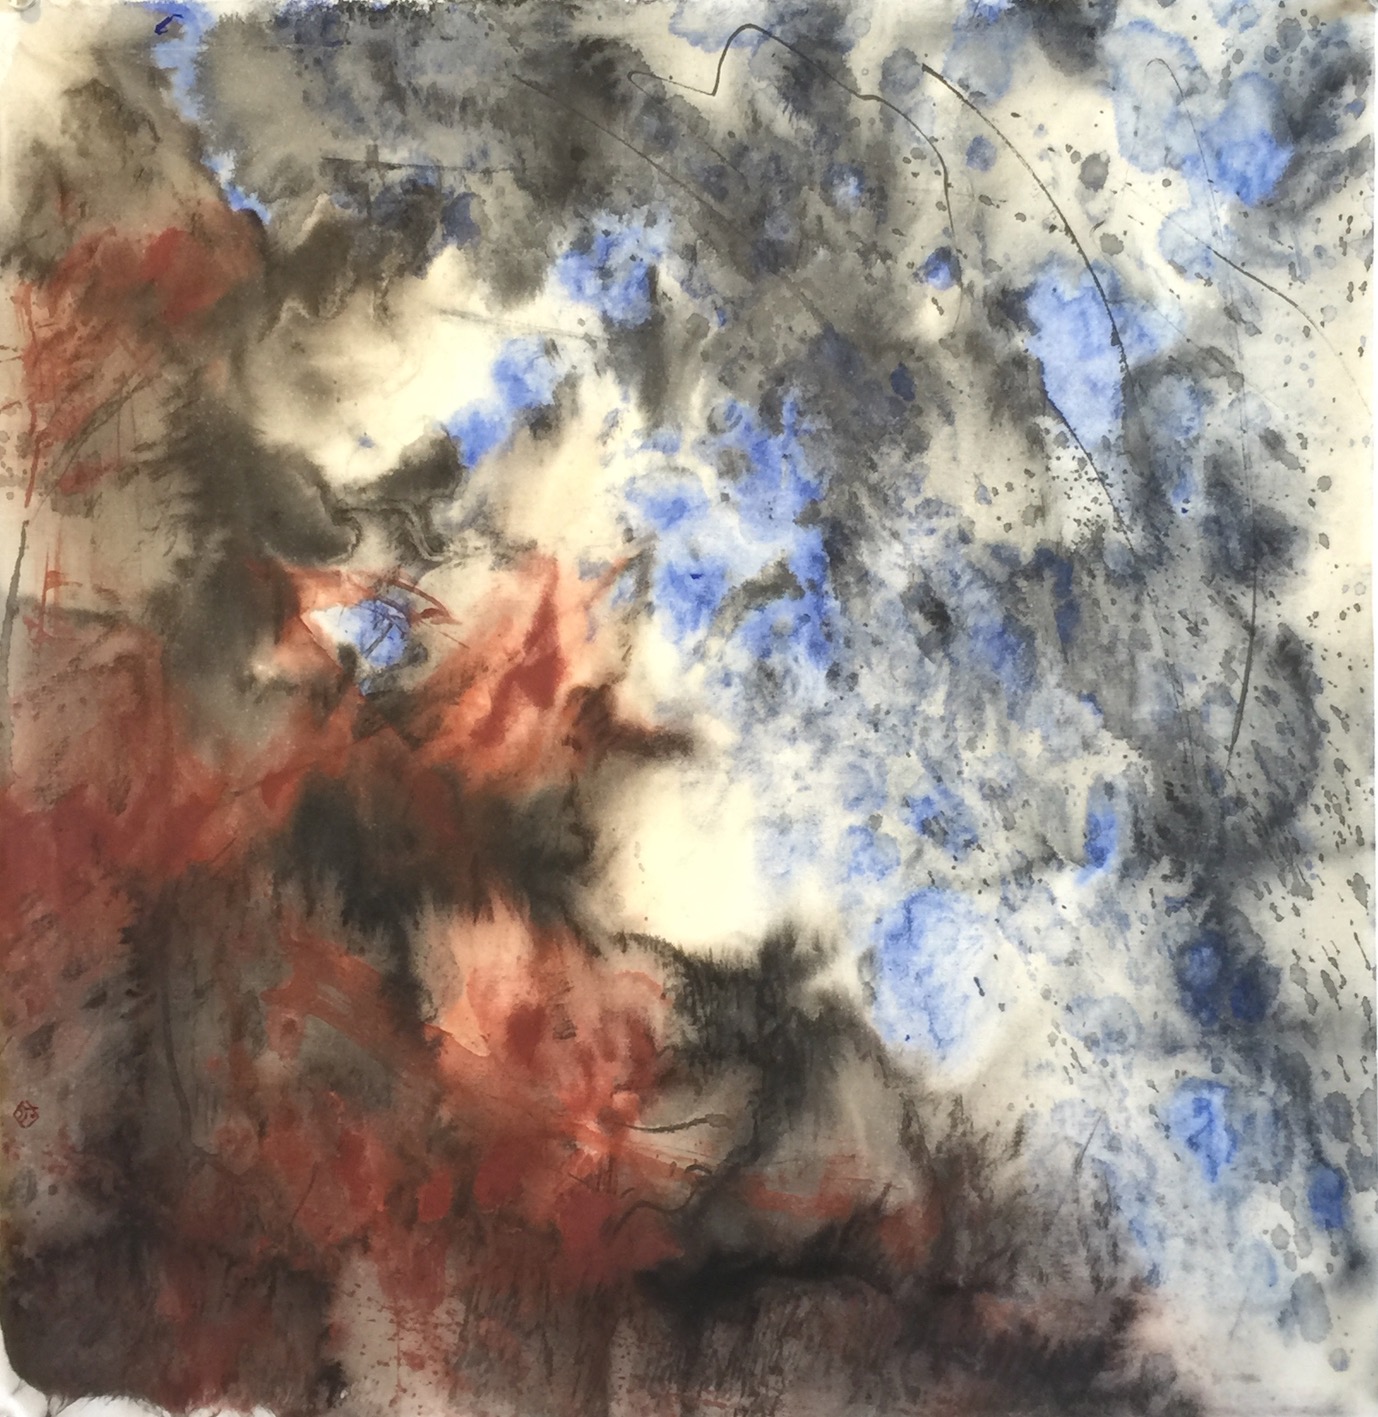 Red Rock in the Blue Air 2 49 X 48 cms sumi ink, acrylic, iron oxide 惑星の誕生 2 墨　アクリル　ベンガラ　　2020